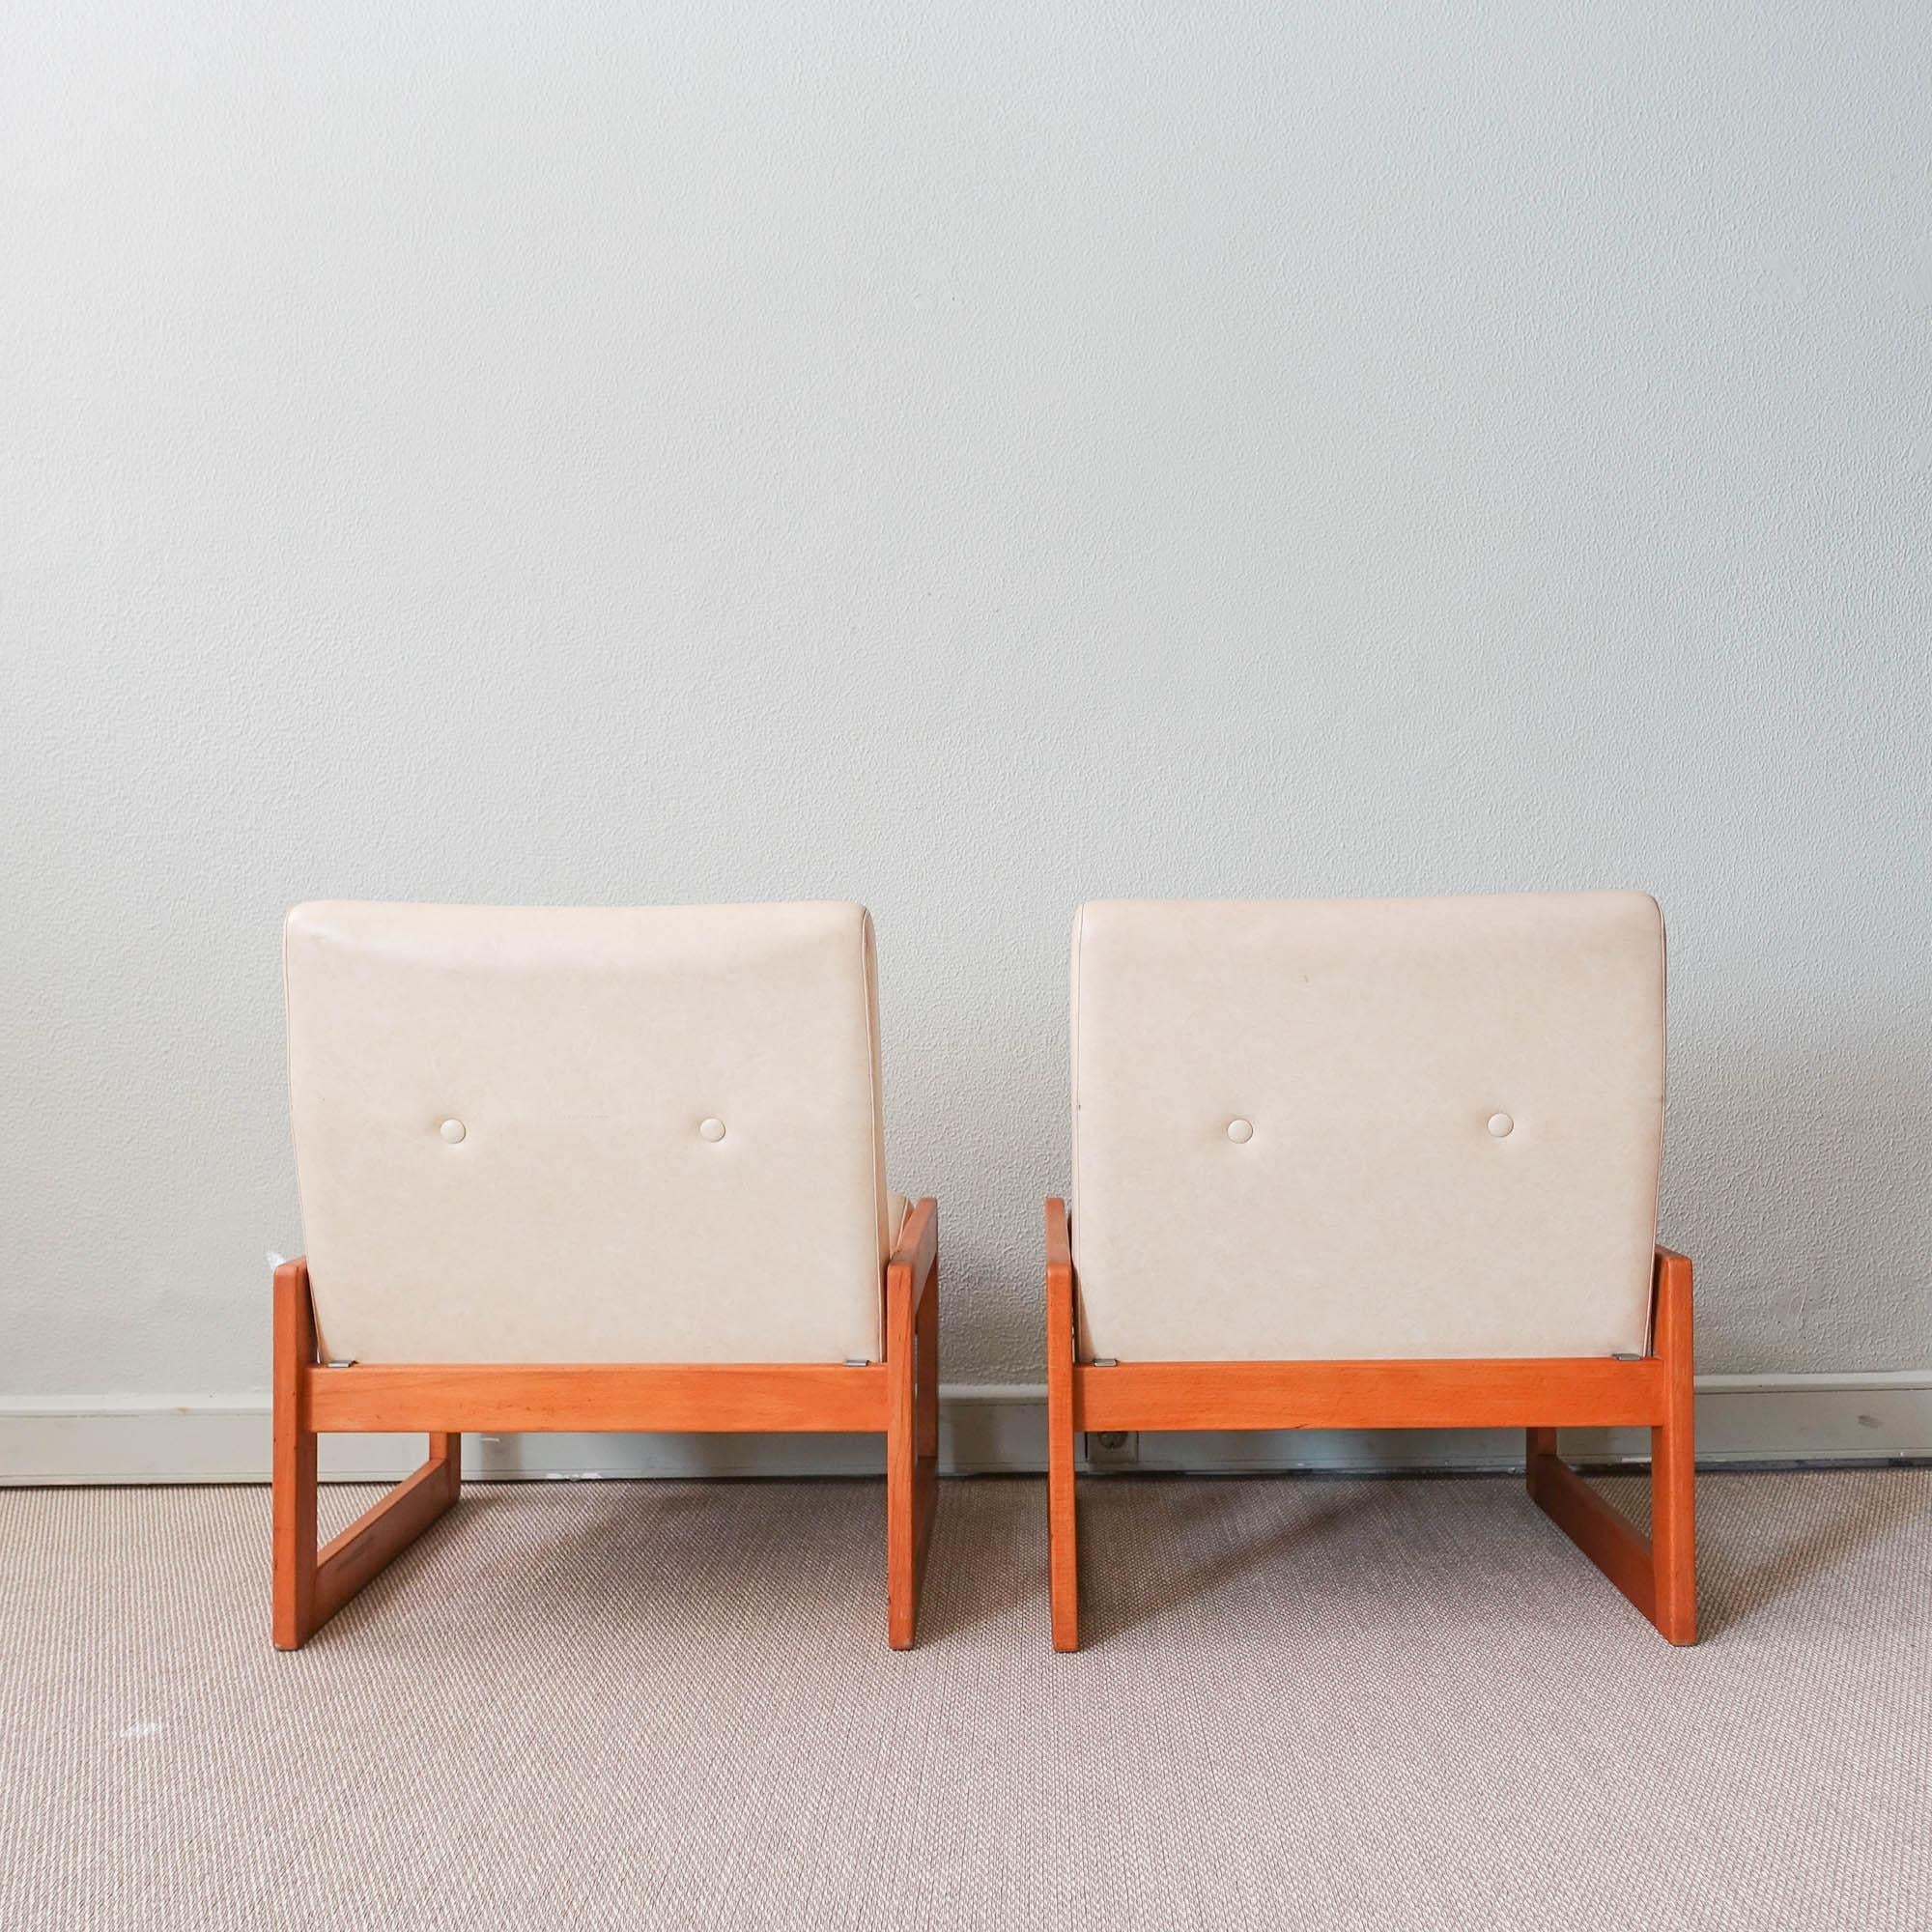 Pair of Easy Chairs, Model Espinho, by José Espinho for Olaio, 1973 In Good Condition For Sale In Lisboa, PT